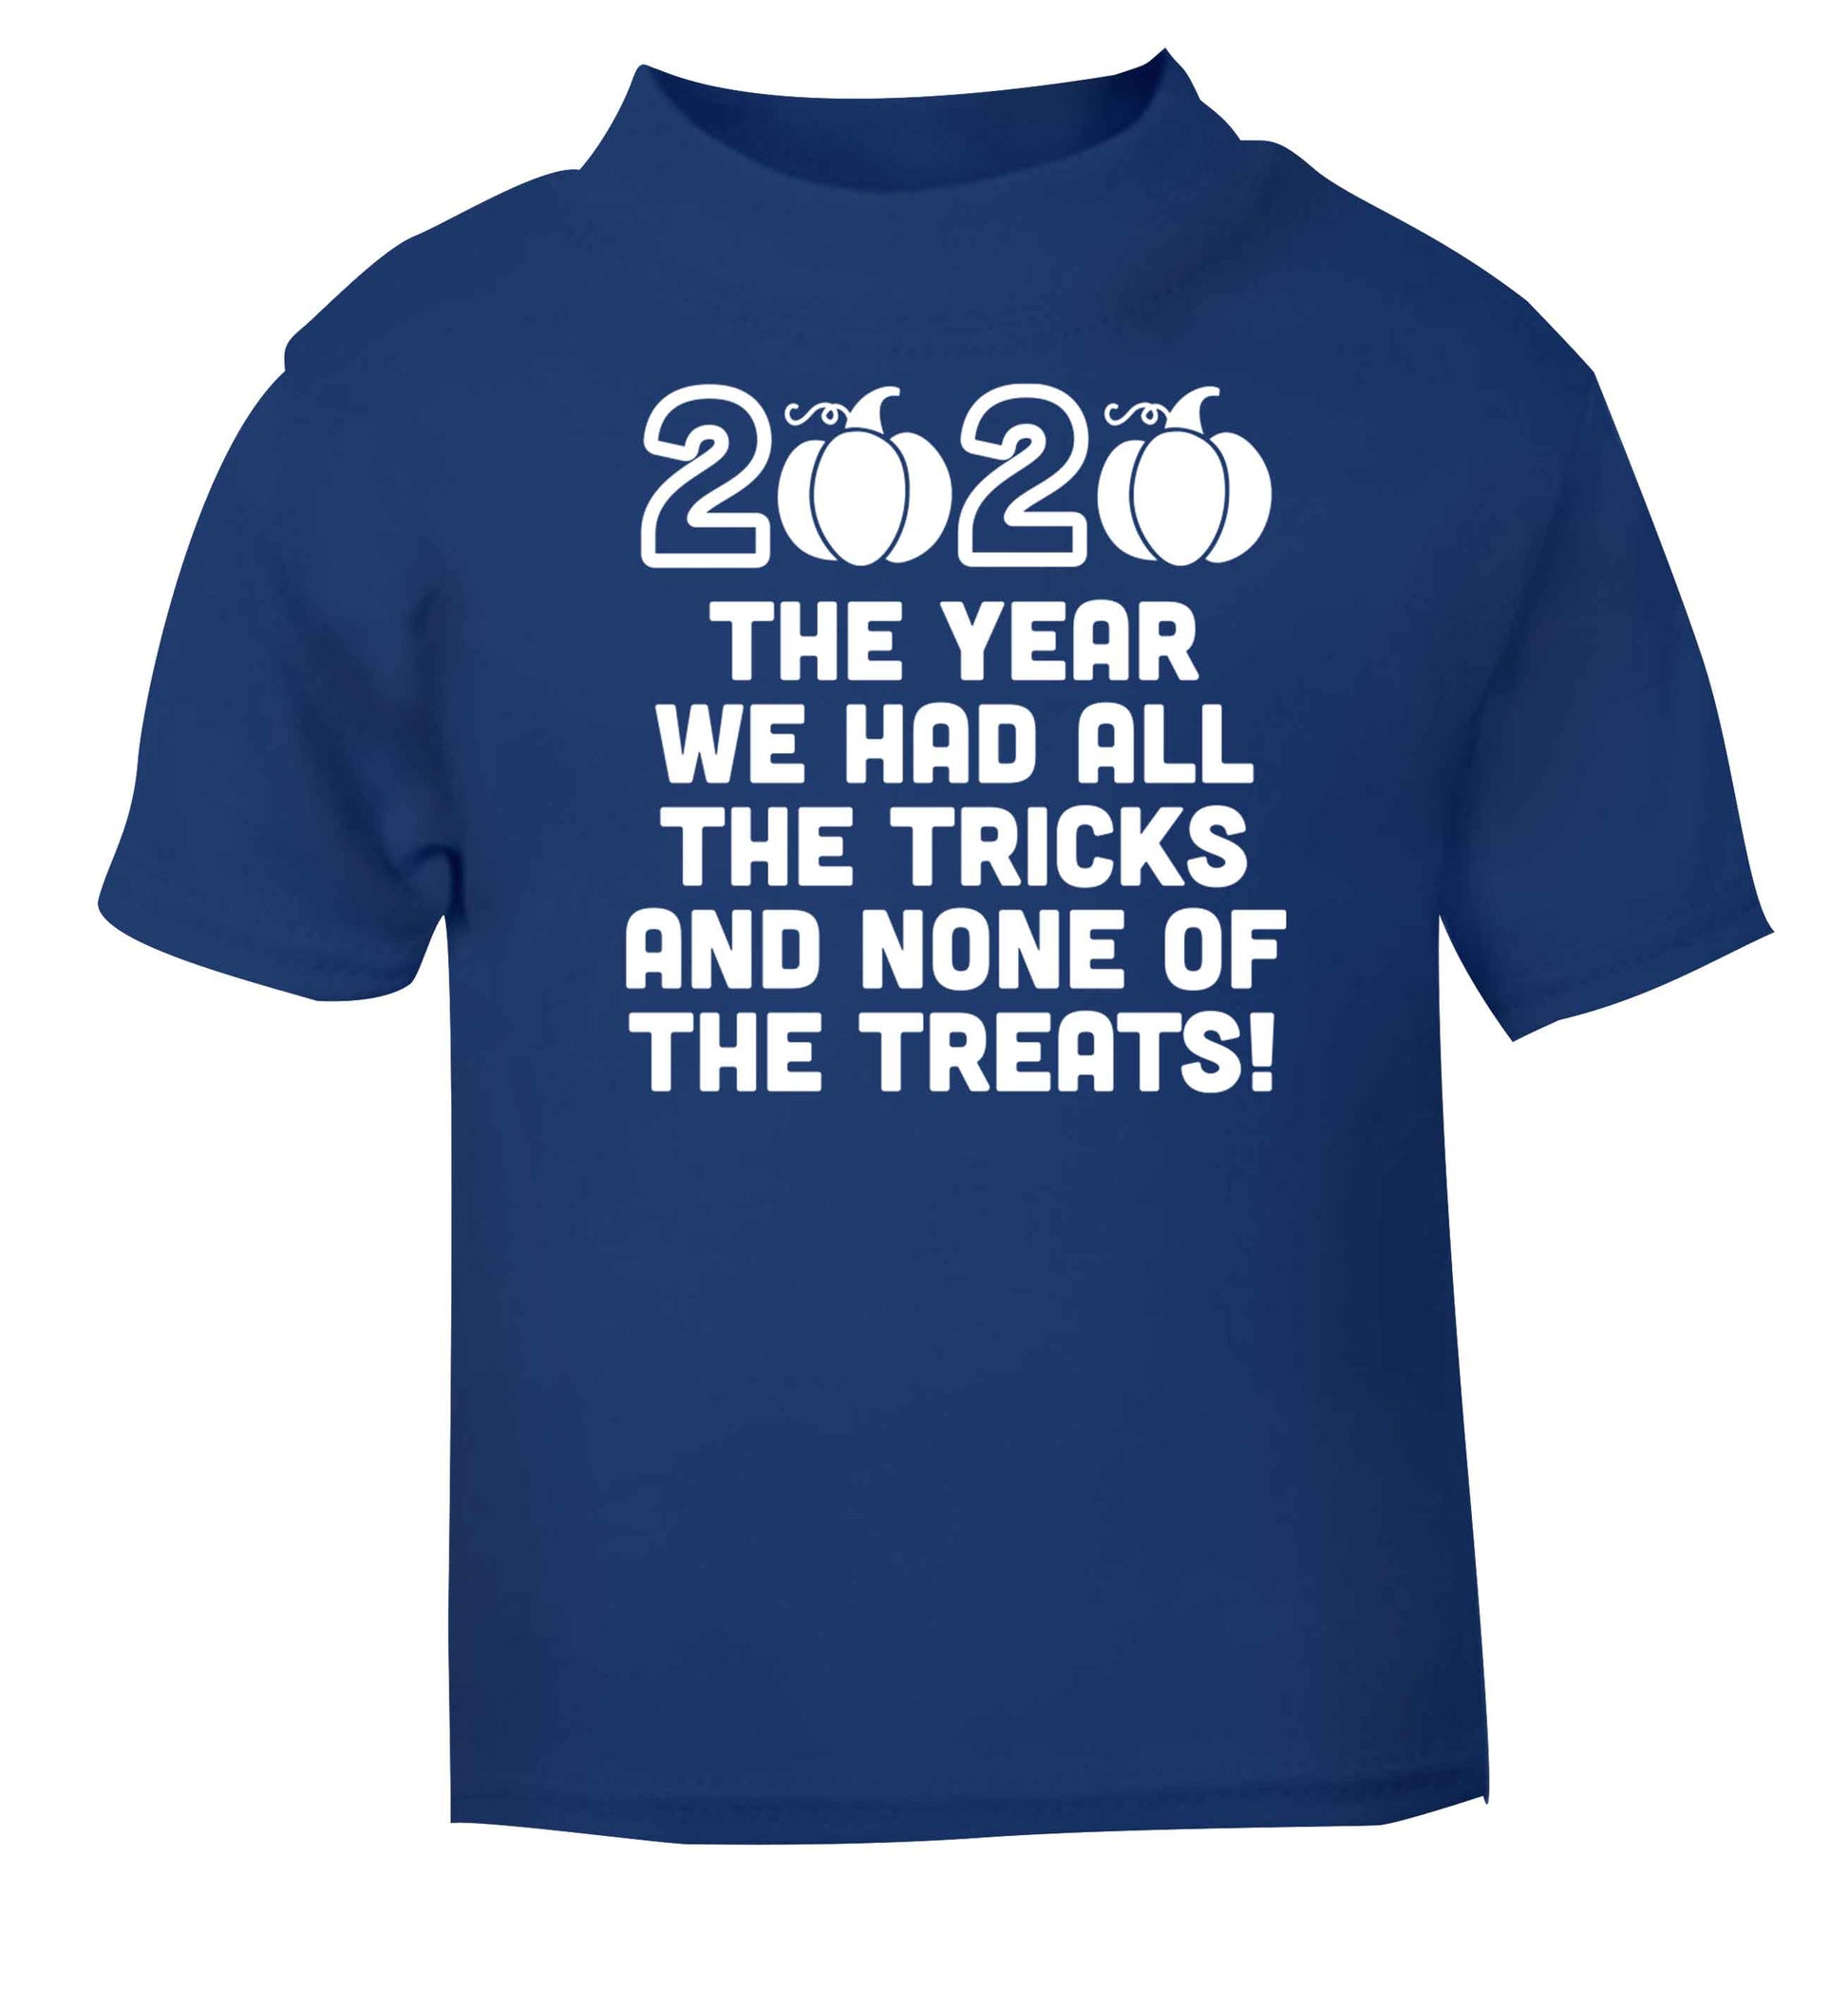 2020 The year we had all of the tricks and none of the treats blue baby toddler Tshirt 2 Years